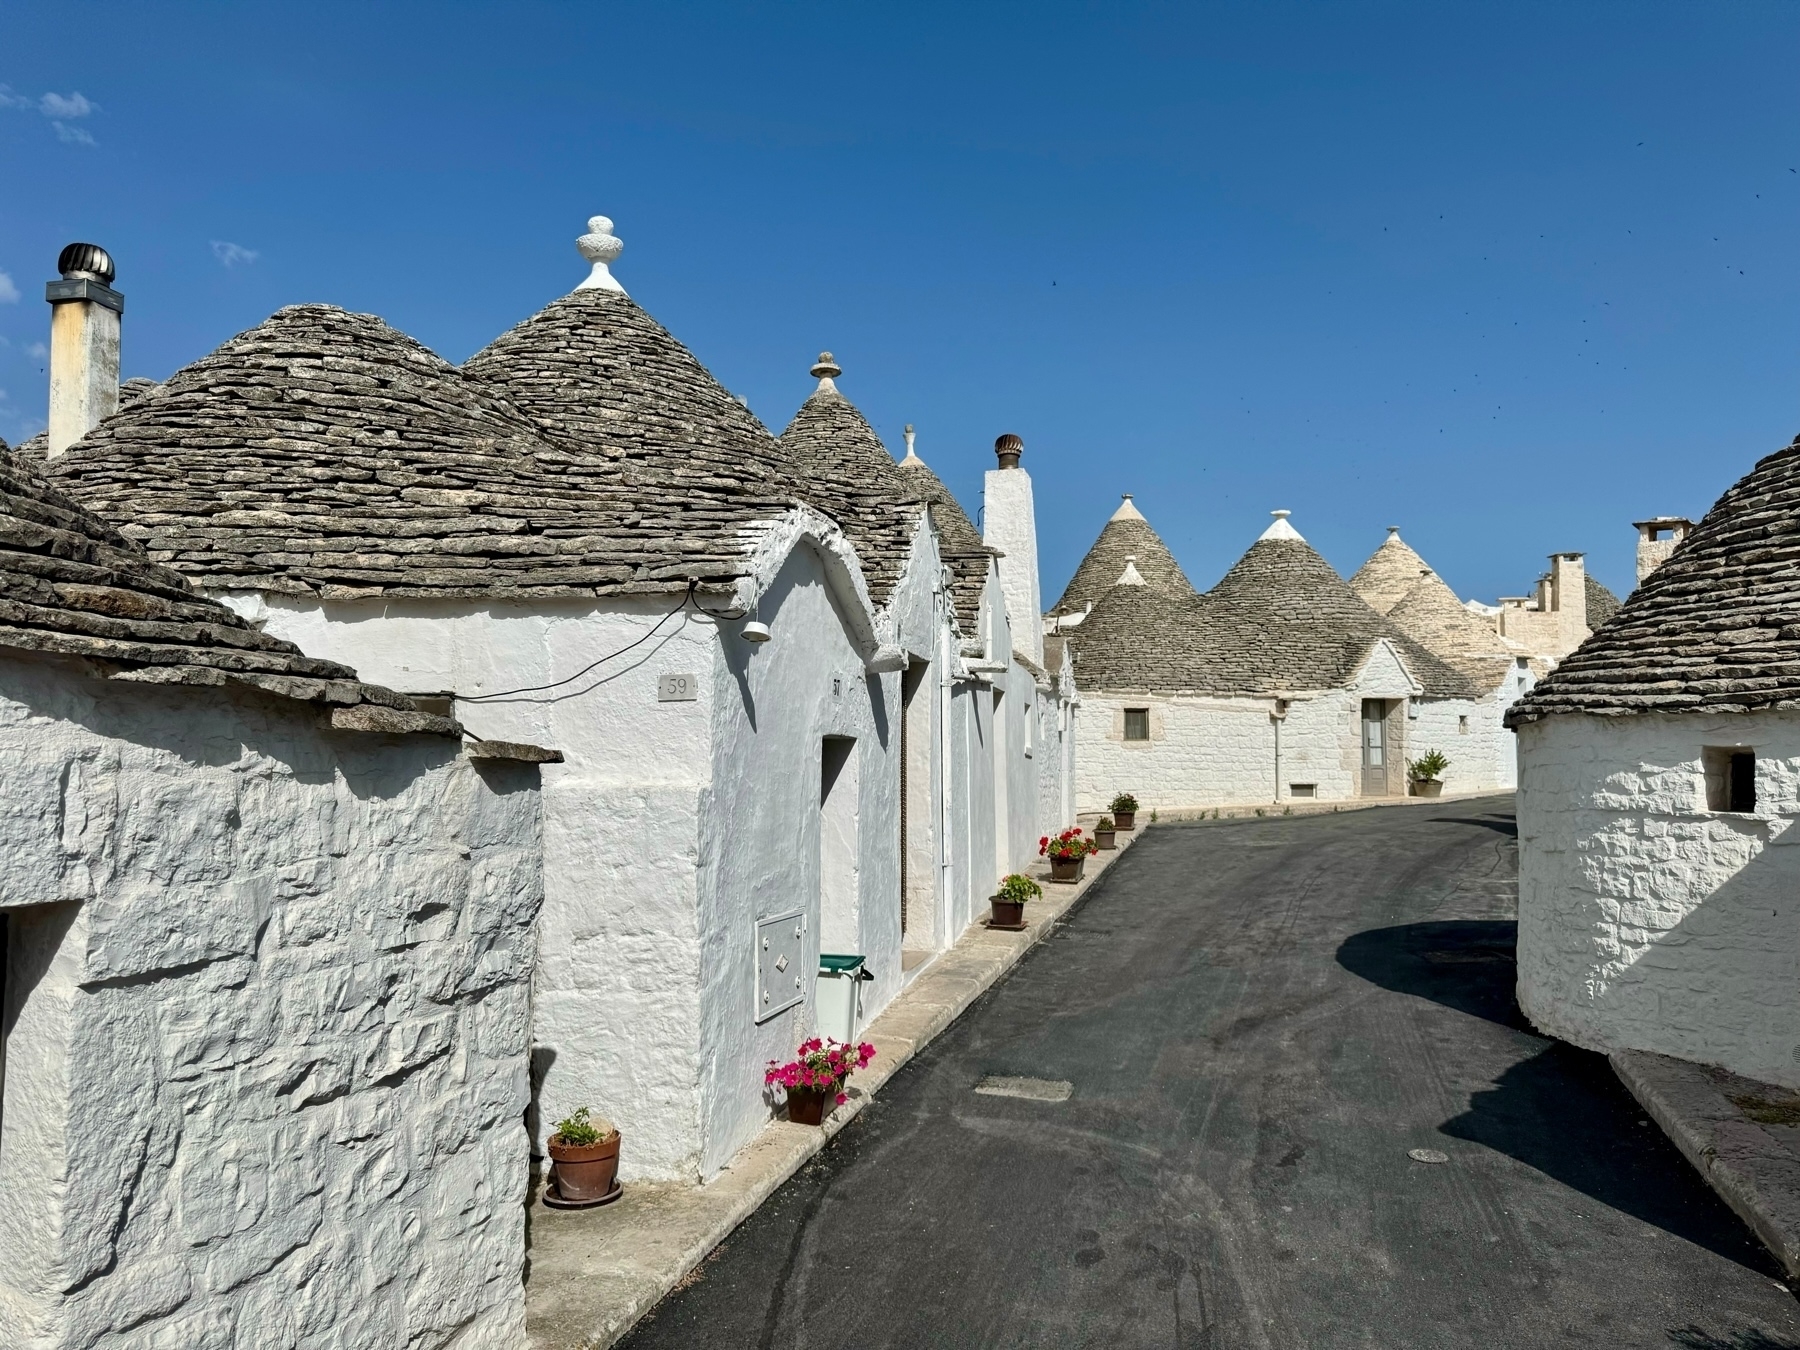 This image shows a narrow street lined with traditional whitewashed stone houses featuring conical roofs, known as trulli, under a clear blue sky. The houses have small flower pots placed along the sidewalk. The overall scene is bright and tranquil.